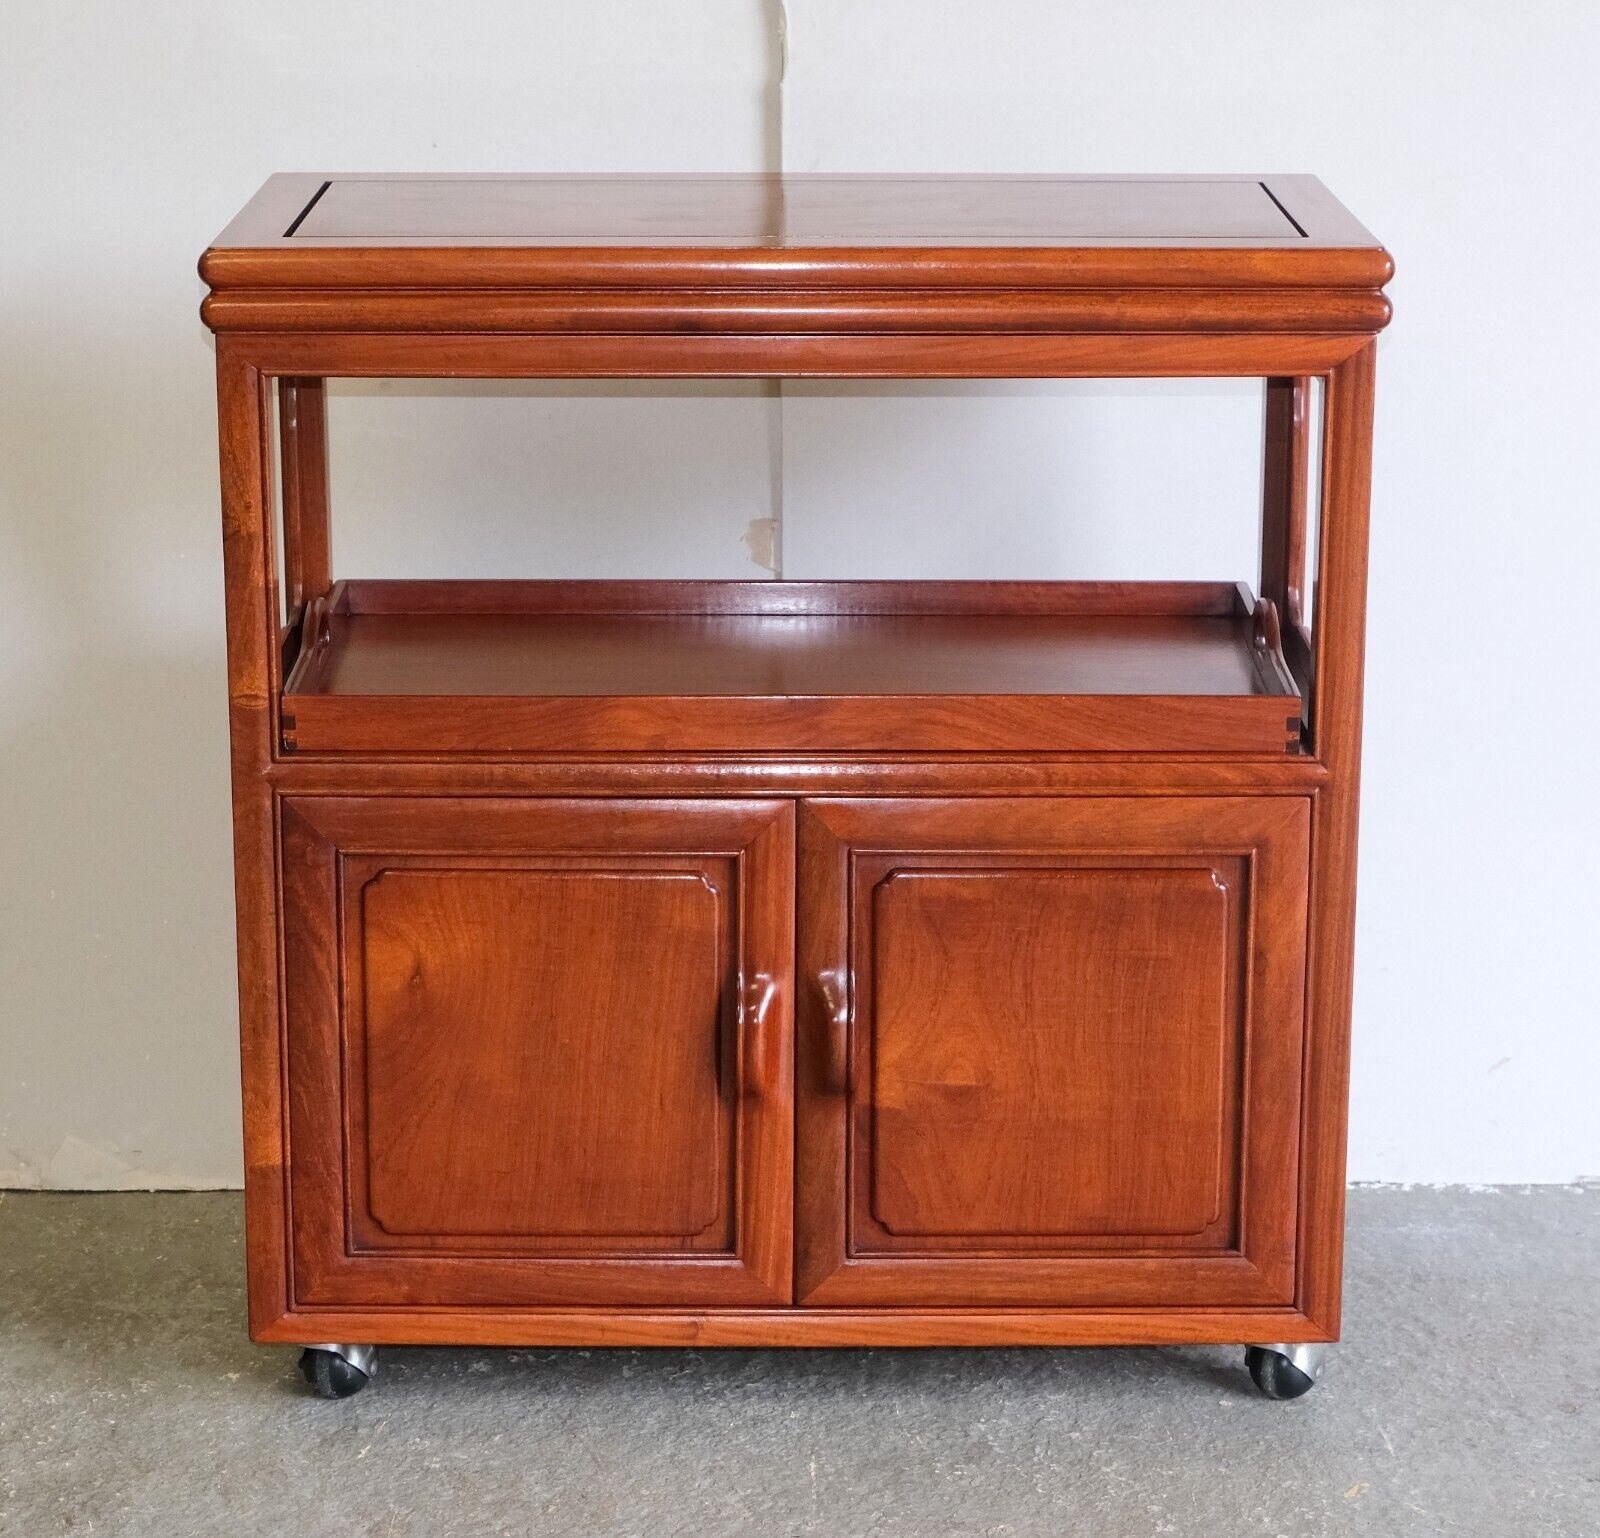 We are delighted to offer for sale this lovely rosewood Chinese buffet sideboard with tray, single tier, and cupboard.

This versatile, unique and well made piece compromises a good size tray and cupboard. The top can be open and slide, so it can be